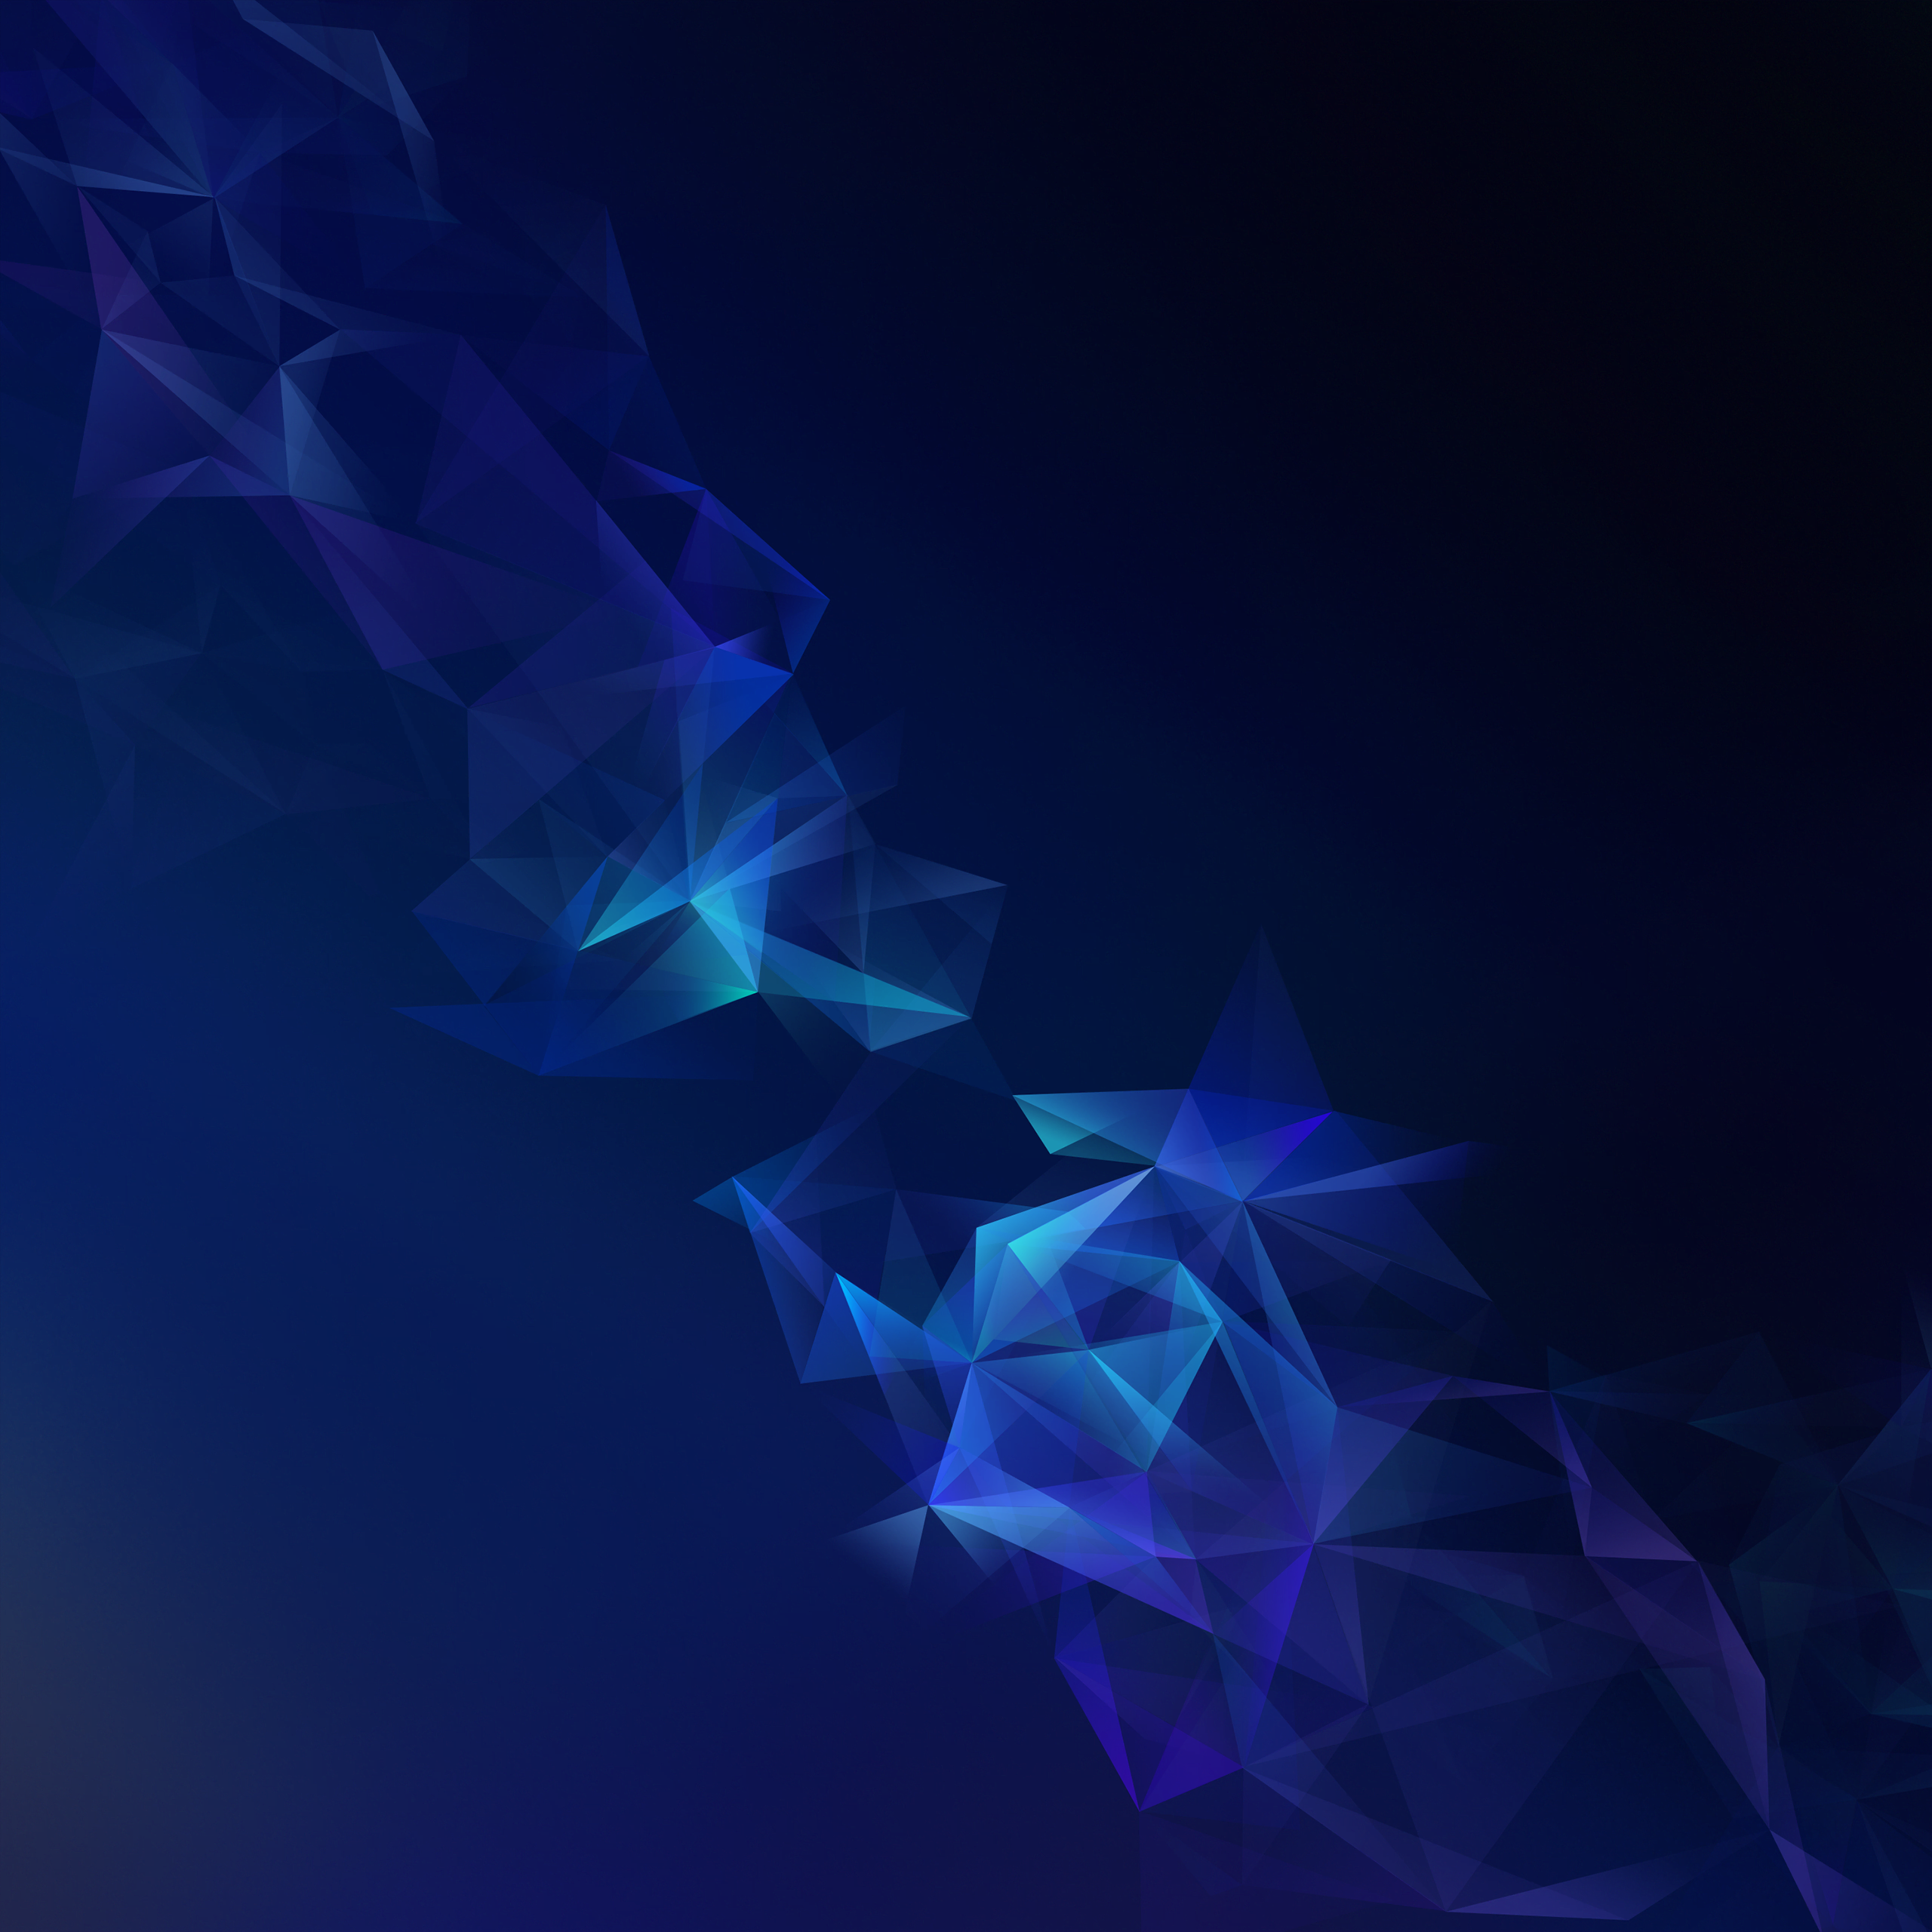 Heres the default wallpaper from the 2019 Notebook 9 Pro and Notebook 9  Pen up for downloading if youd like Link also in the comments I posted  this before a while ago